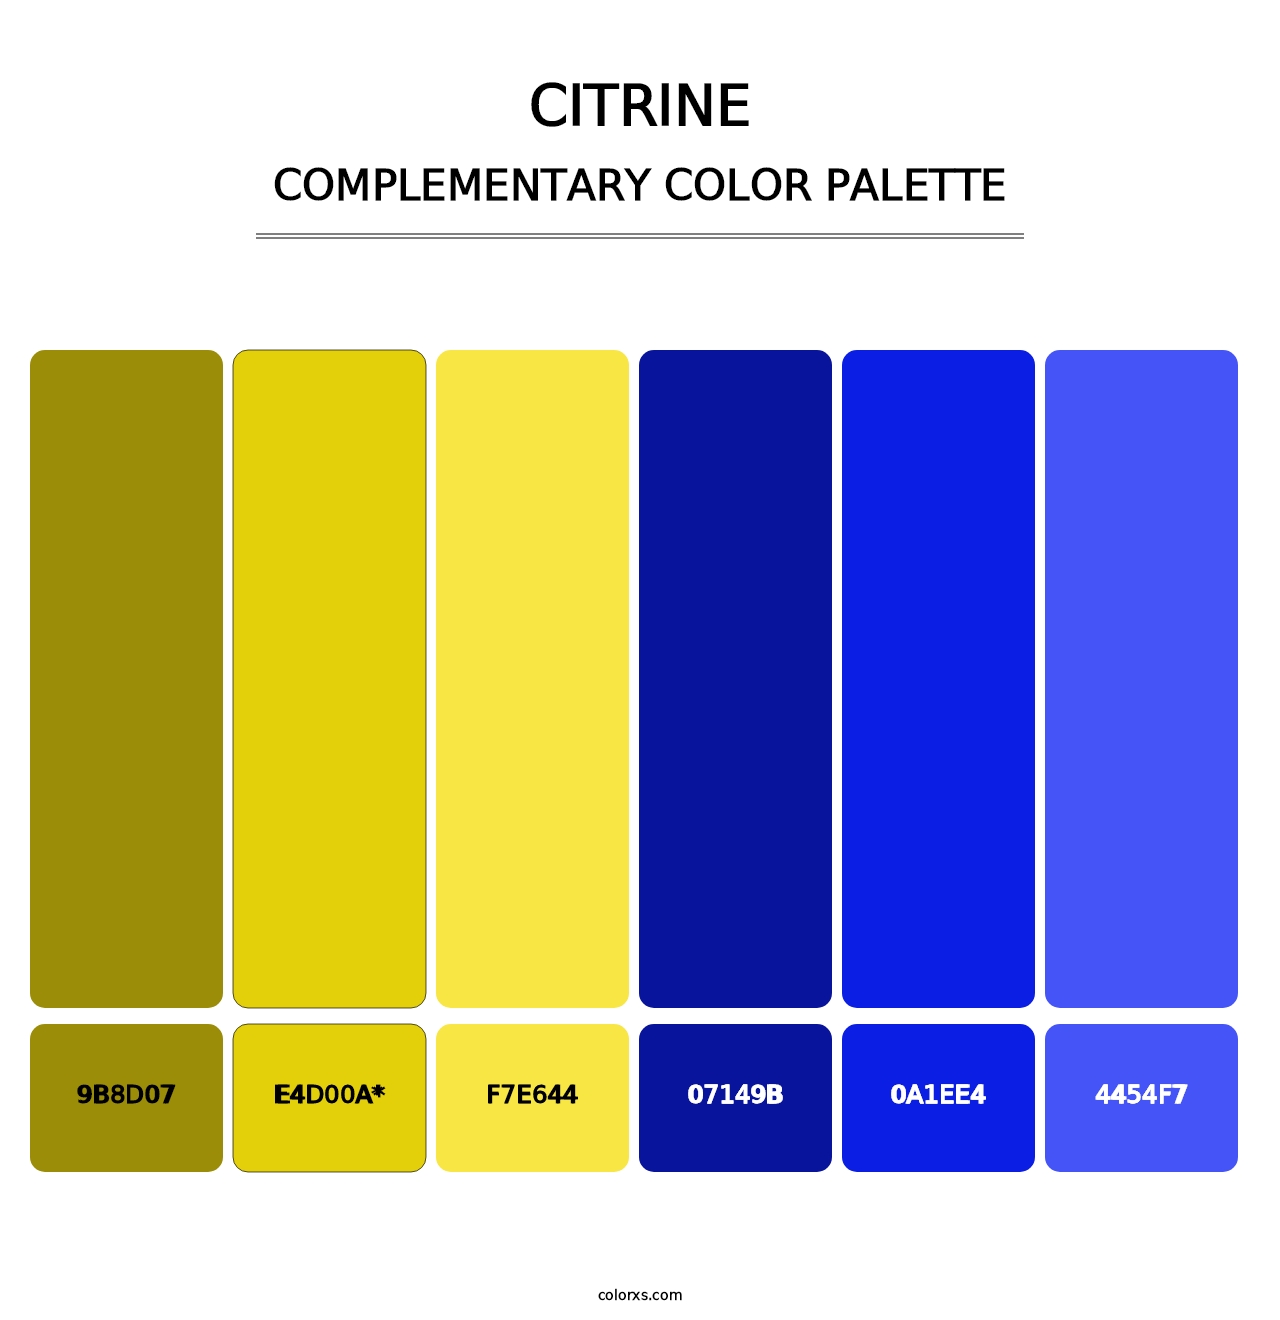 Citrine - Complementary Color Palette